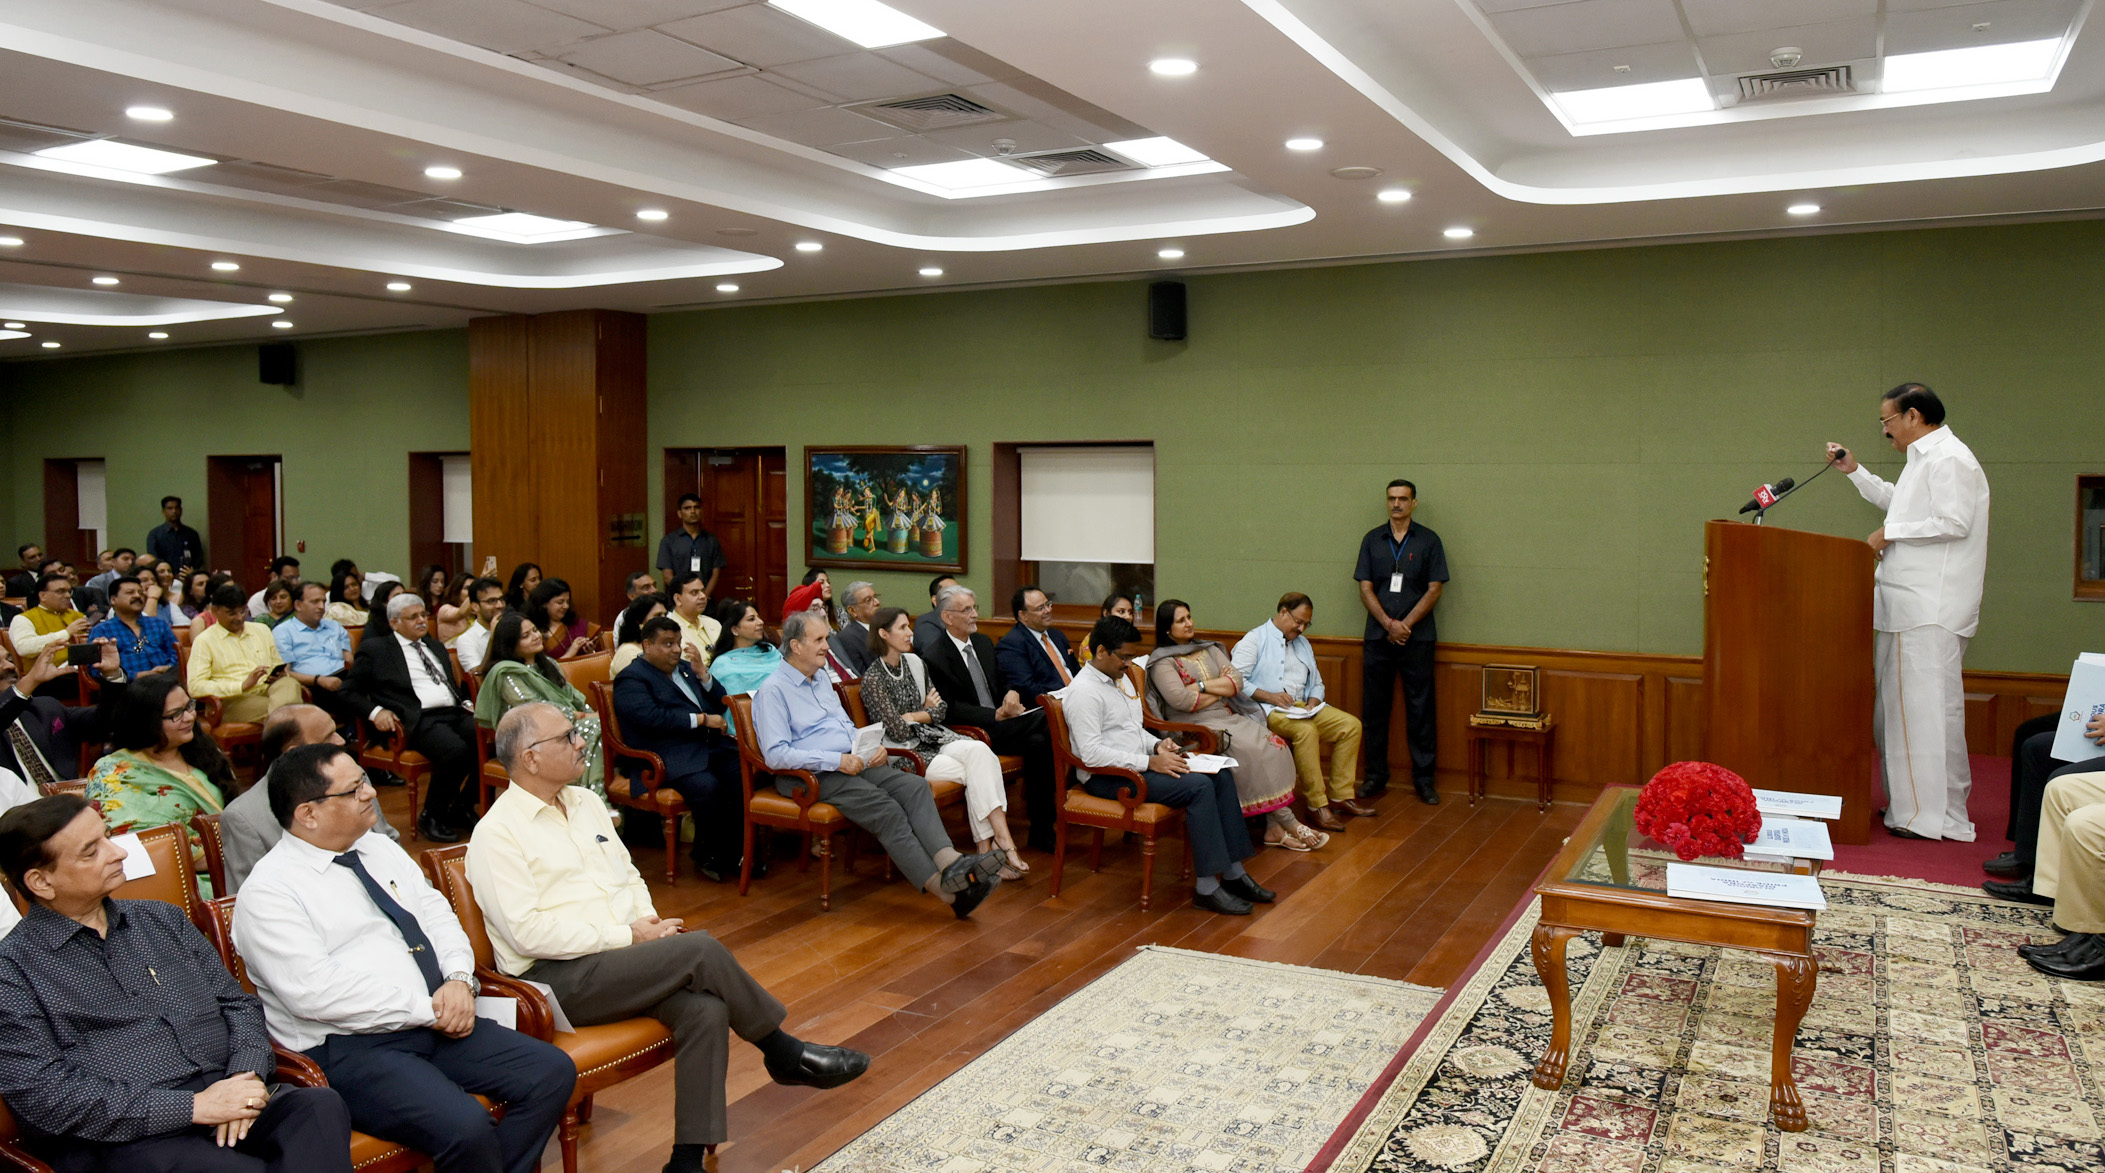 Vice President,  M. Venkaiah Naidu addressing the gathering after releasing the Coffee Table Book titled 'Glorious Diaspora - Pride of India', containing brief profiles of recipients of Pravasi Bharatiya Samman Awards from 2003 to 2019, in New Delhi 